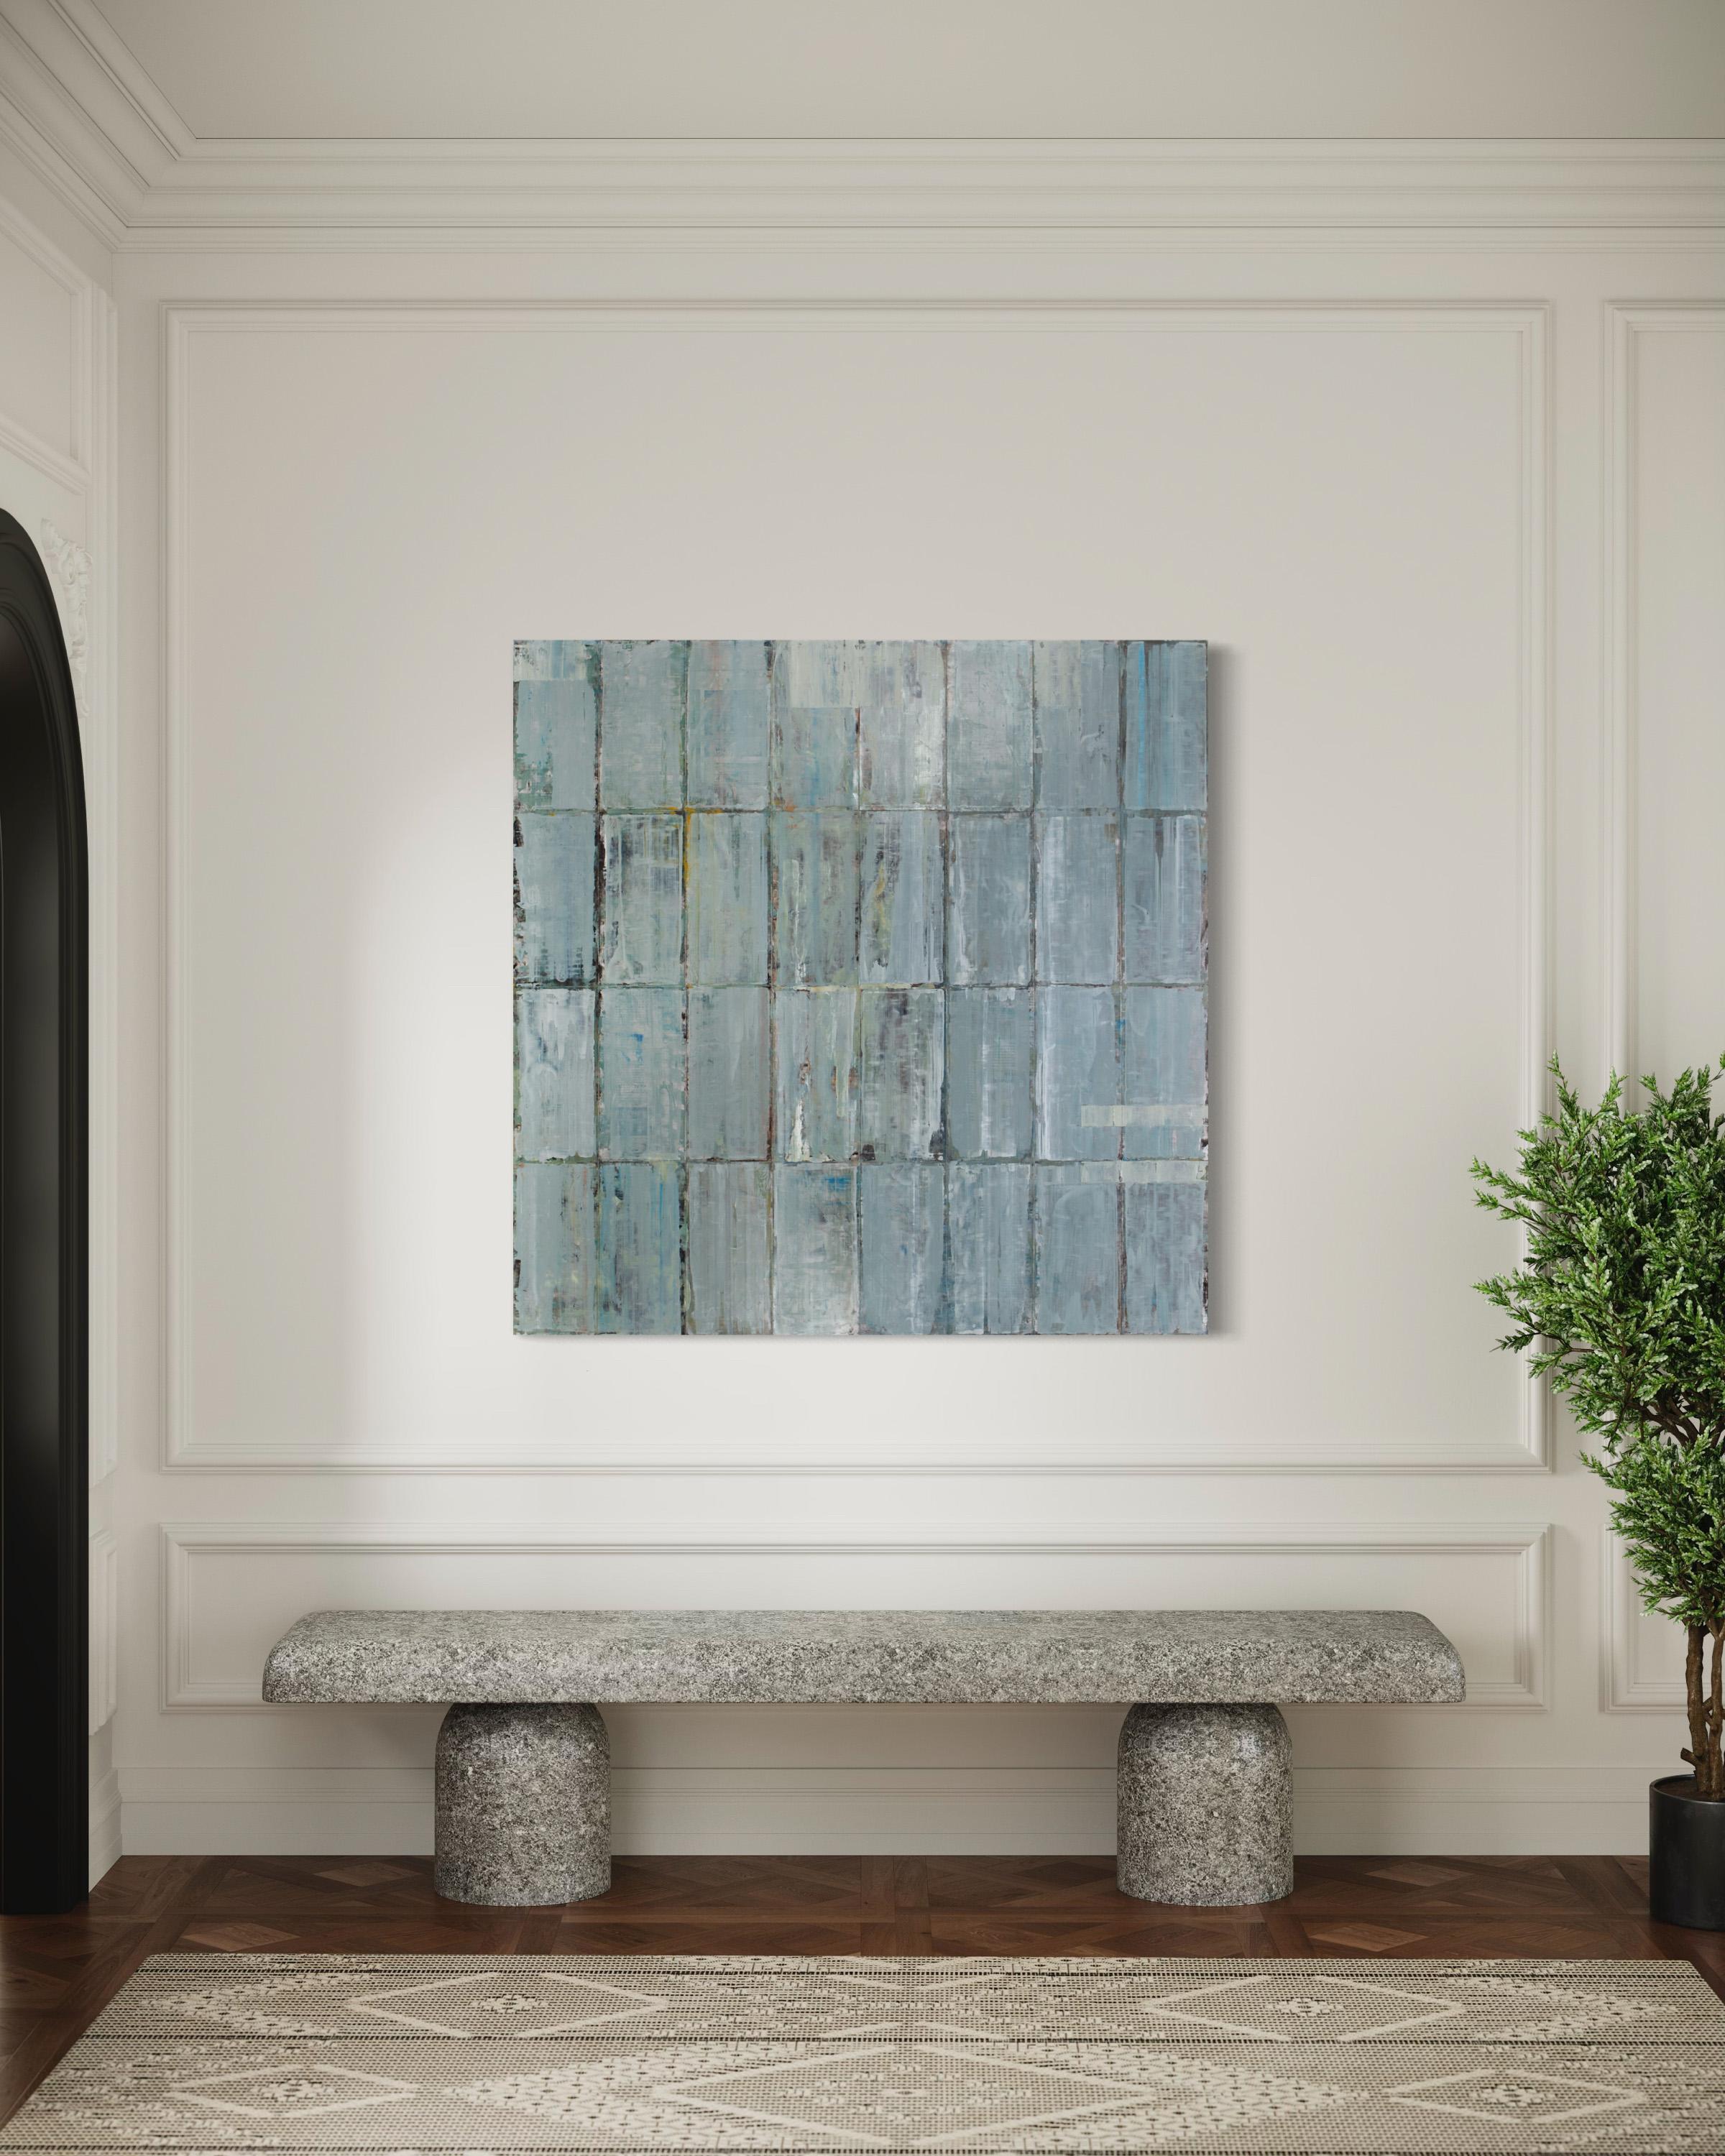 This abstract geometric painting by Ned Martin is made with oil on aluminum and board, and features a cool blue-grey palette. It is signed by the artist on the back of the board and is wired and ready to hang in two different orientations, depending